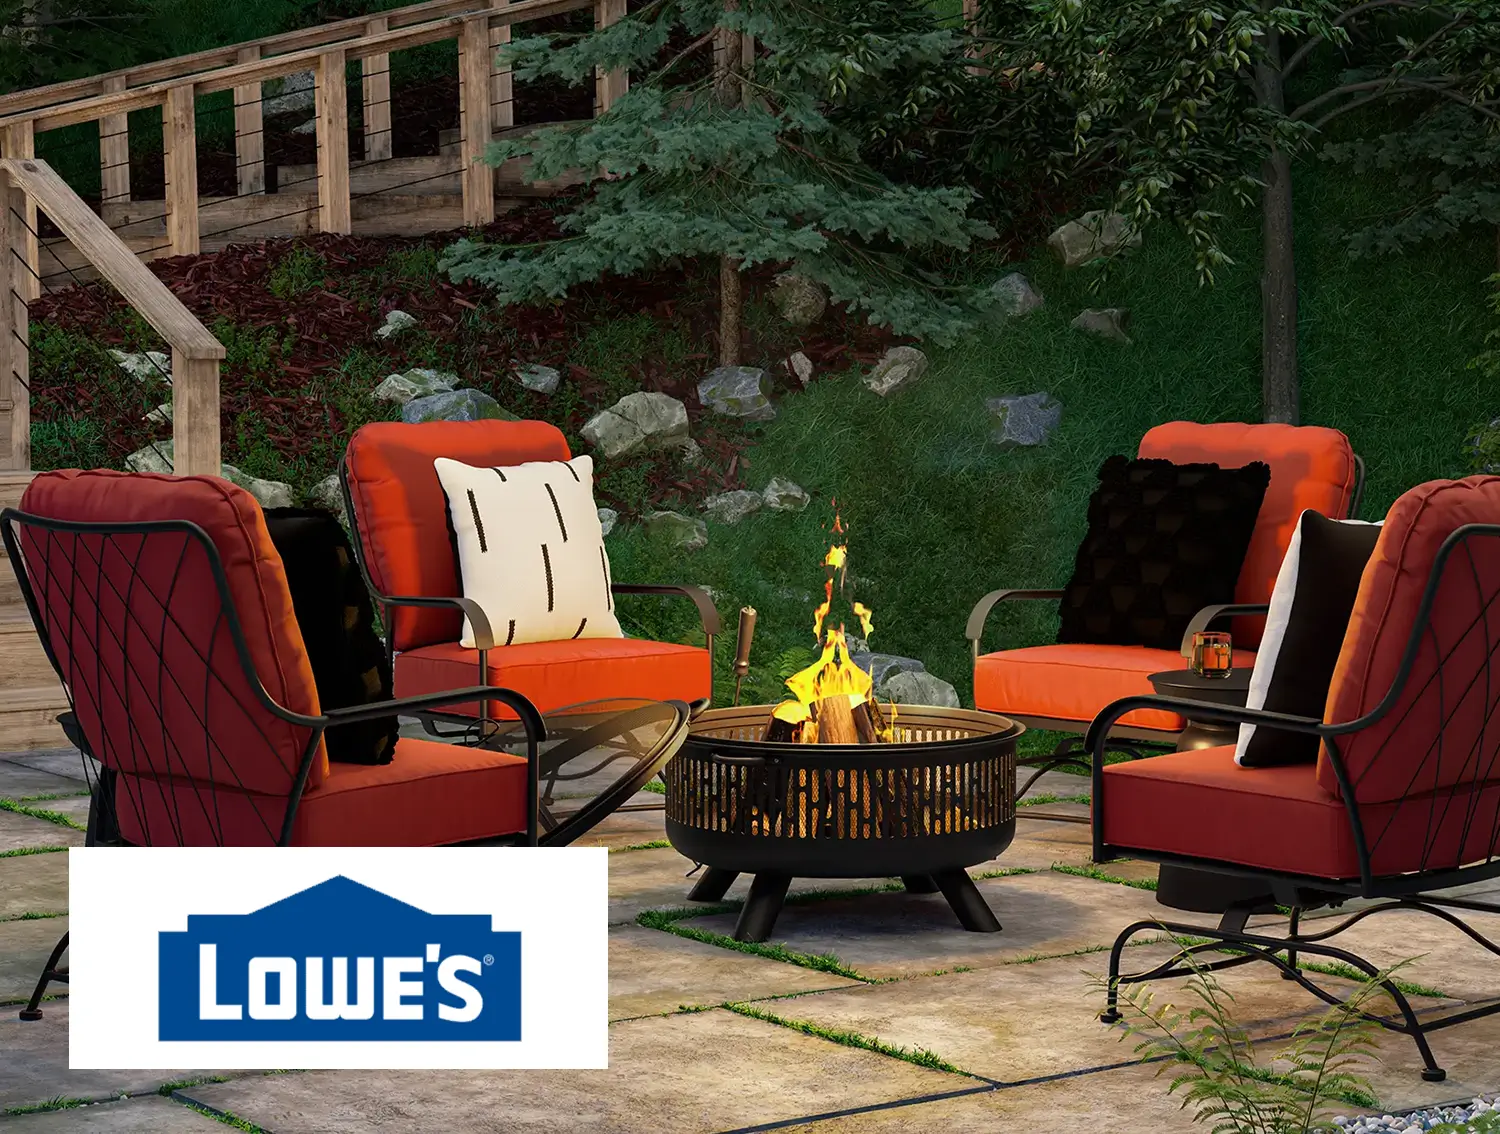 How We Utilized CGI Technology to Boost Lowe’s Market Presence & Cut Costs